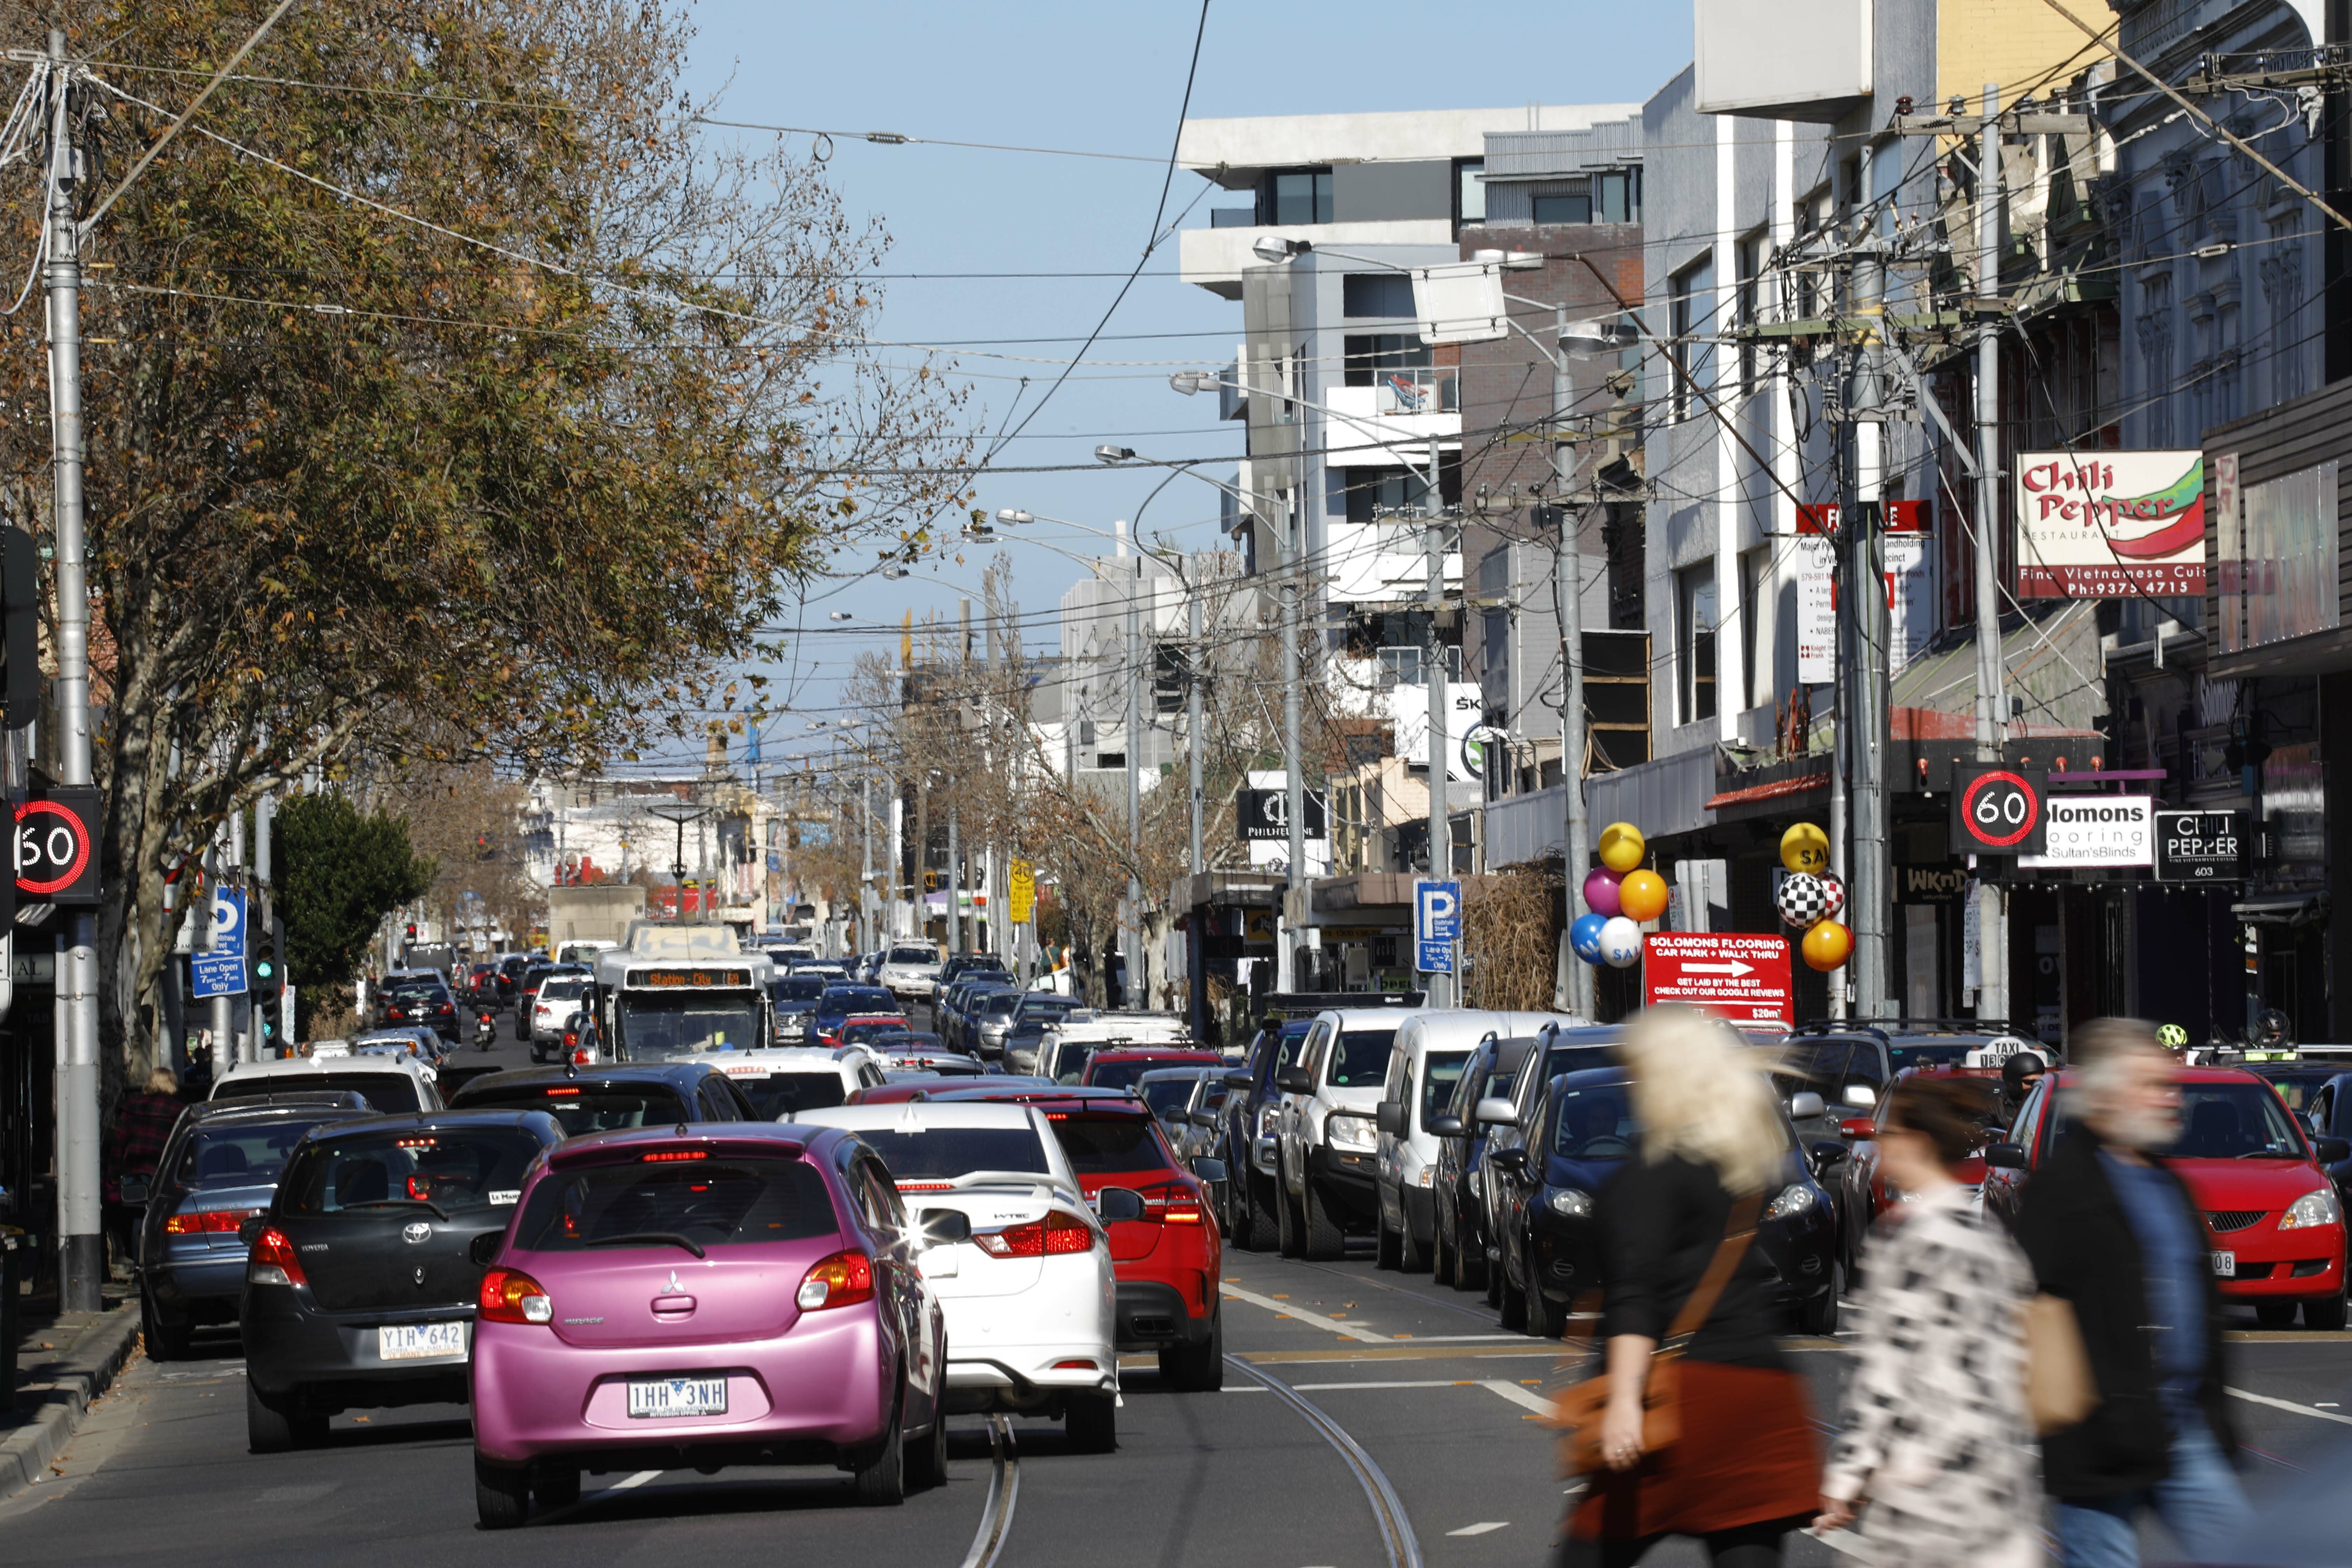 Ascot Vale street with cars, pedestrians, shops and apartments